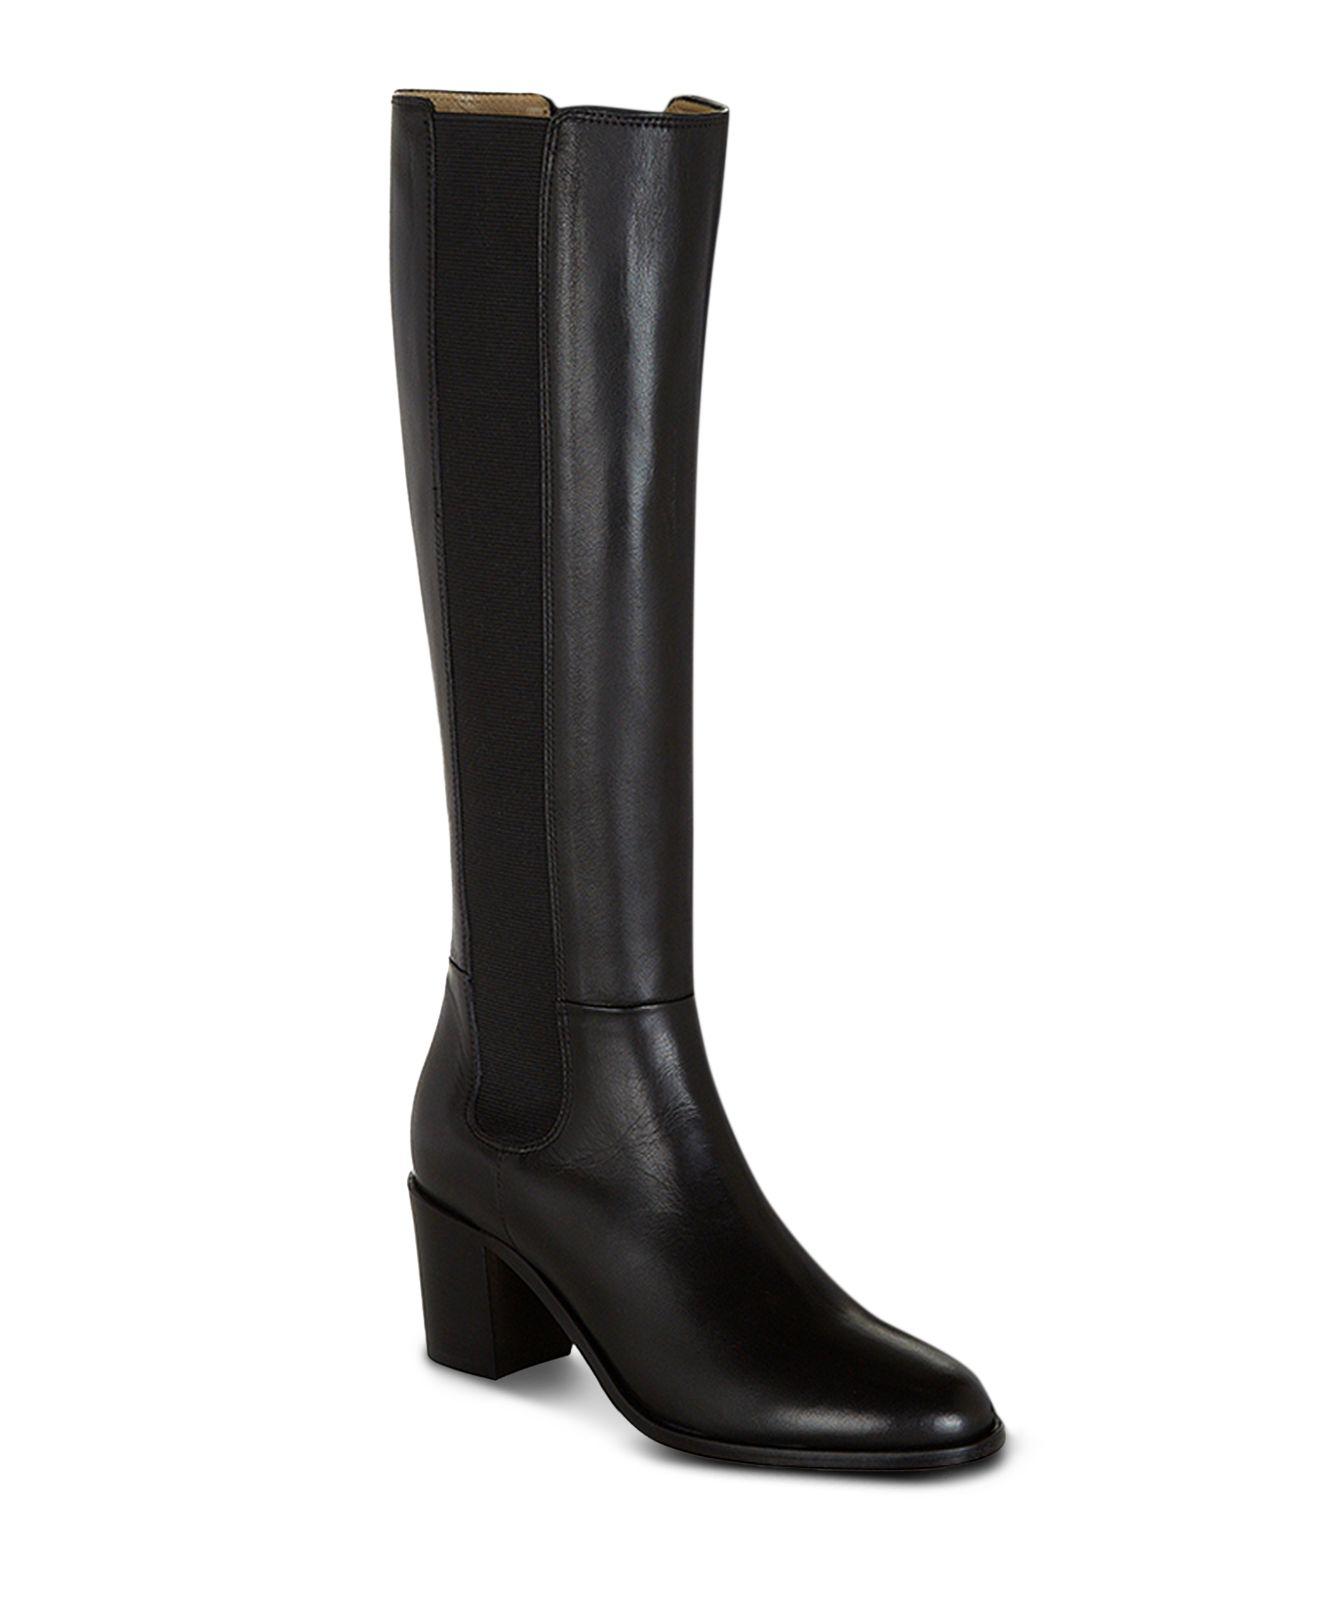 Hobbs Women's Lillie Leather Tall Boots 